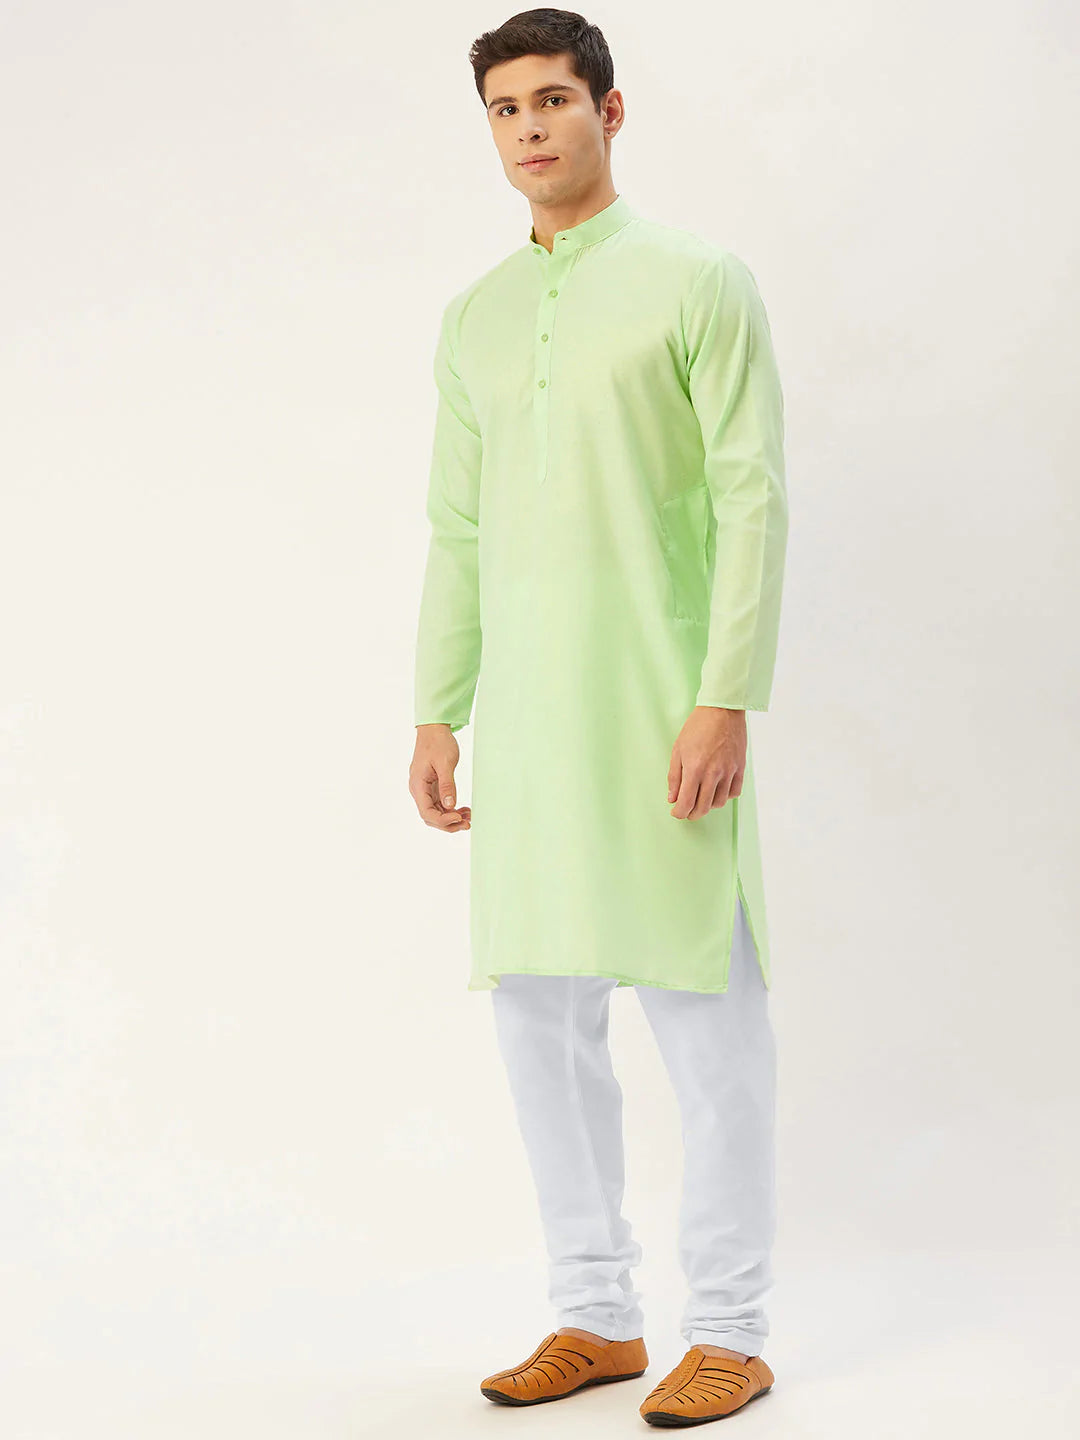 Jompers Men's Lime Cotton Solid Kurta Only ( KO 611 Lime )